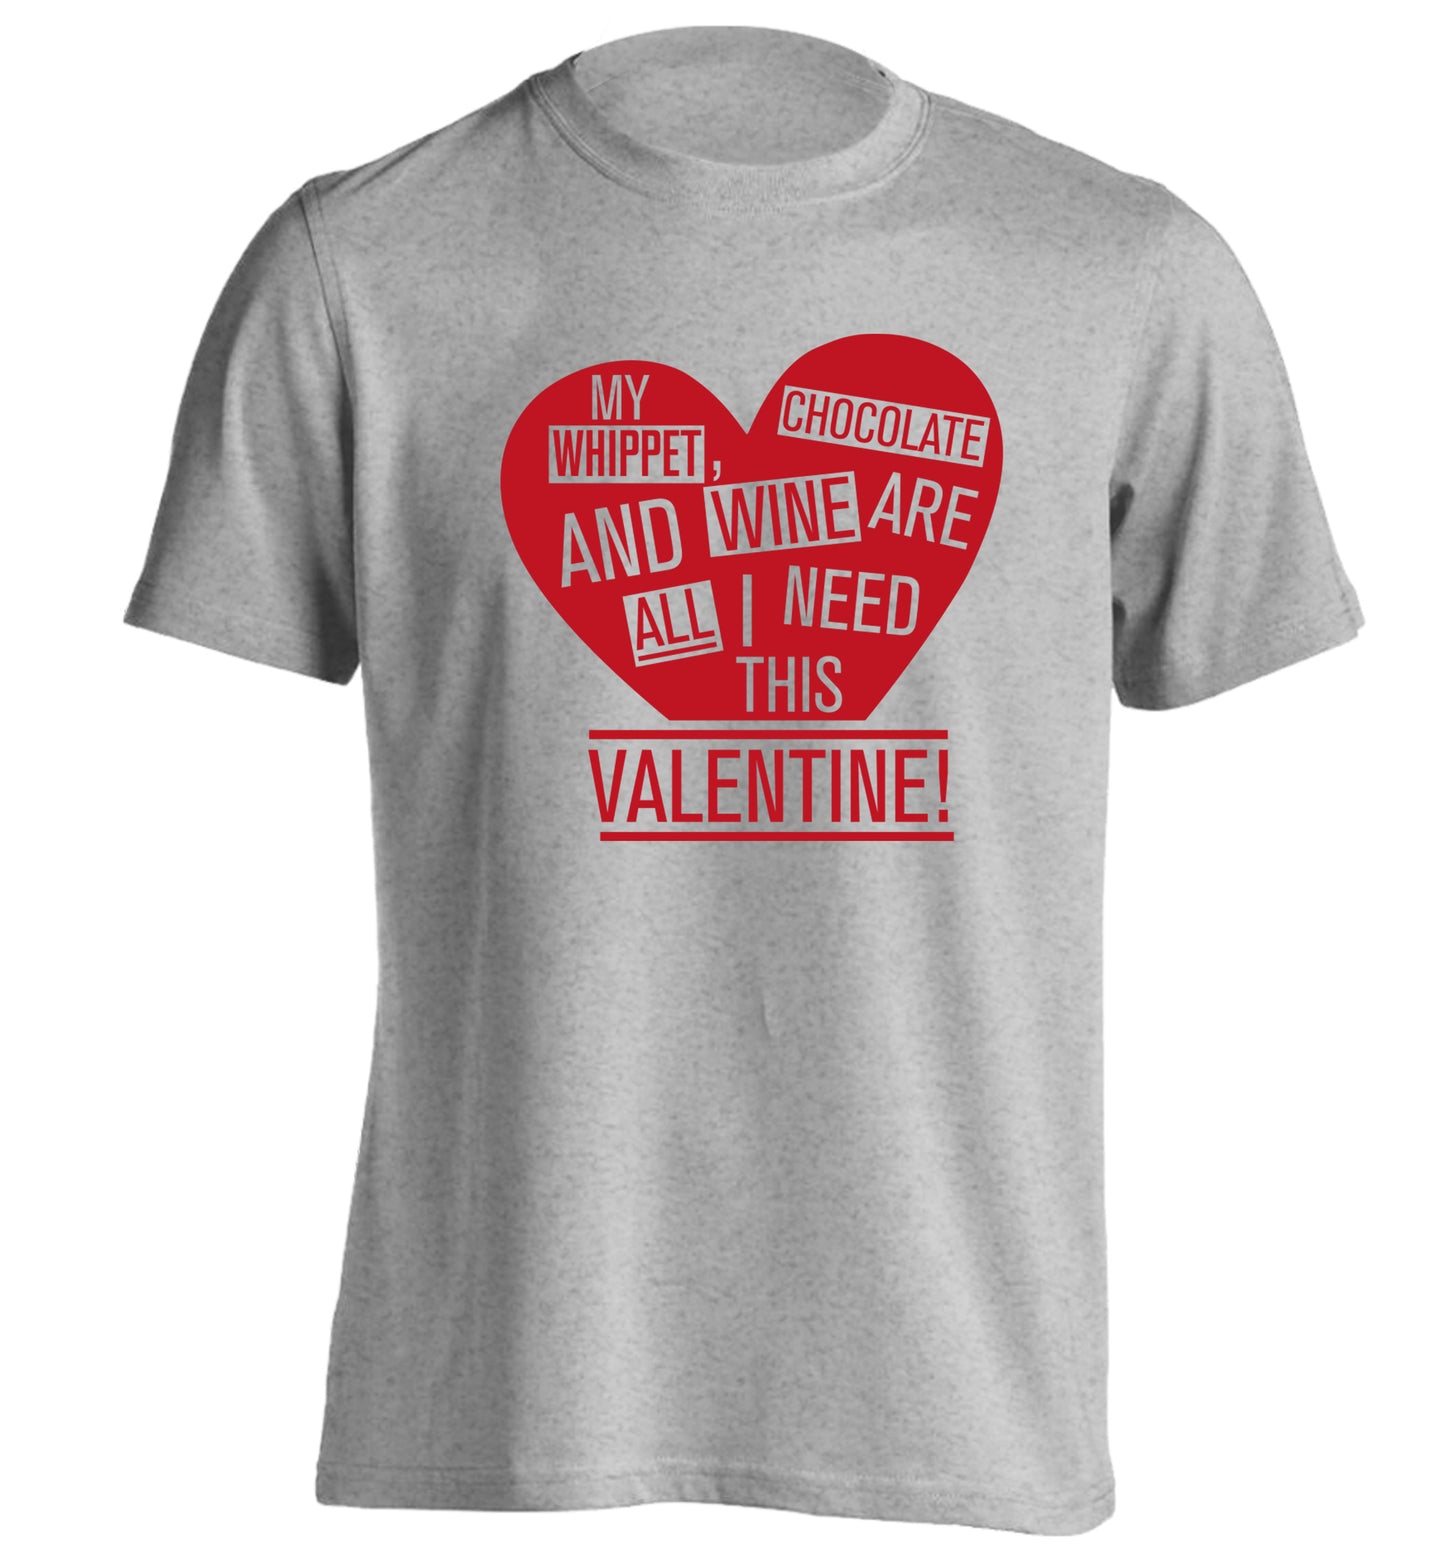 My whippet, chocolate and wine are all I need this valentine! adults unisex grey Tshirt 2XL